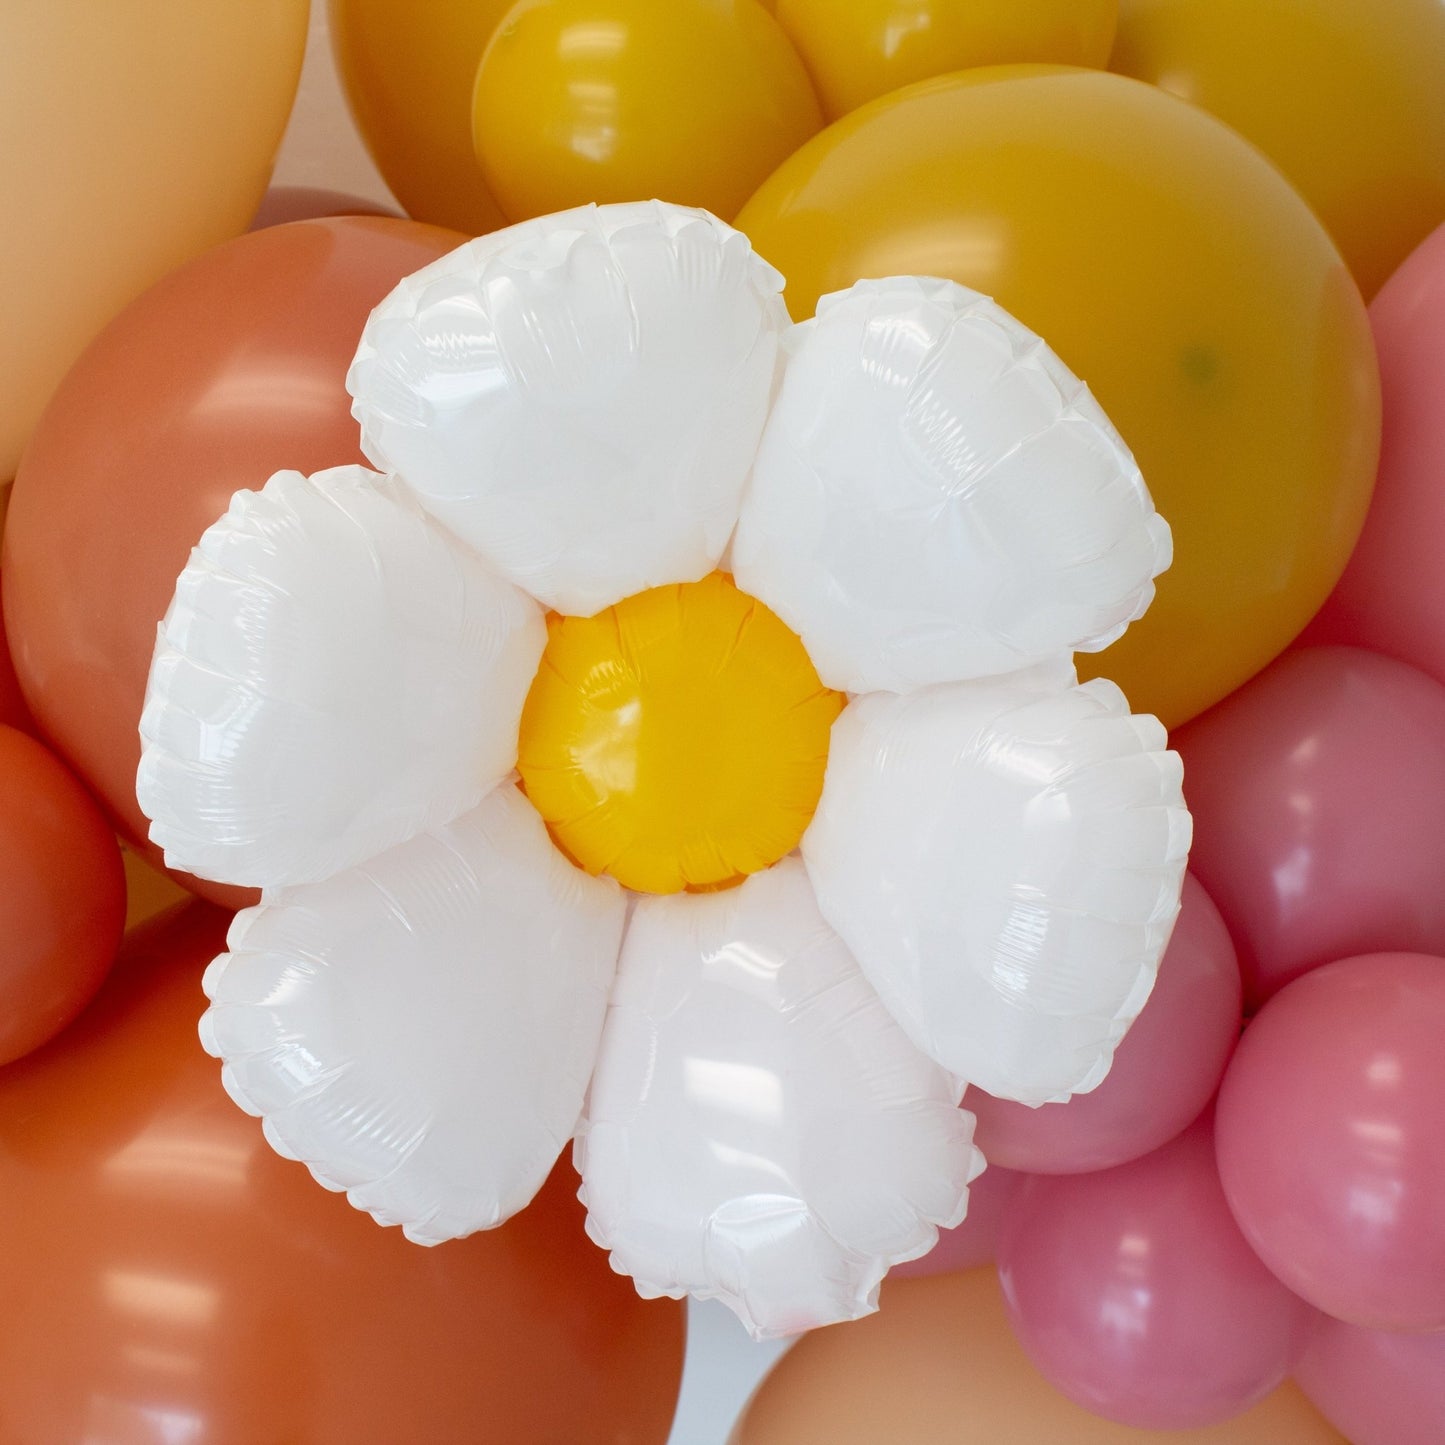 Daisy White and Yellow Balloons (3-Pack) - Ellie's Party Supply